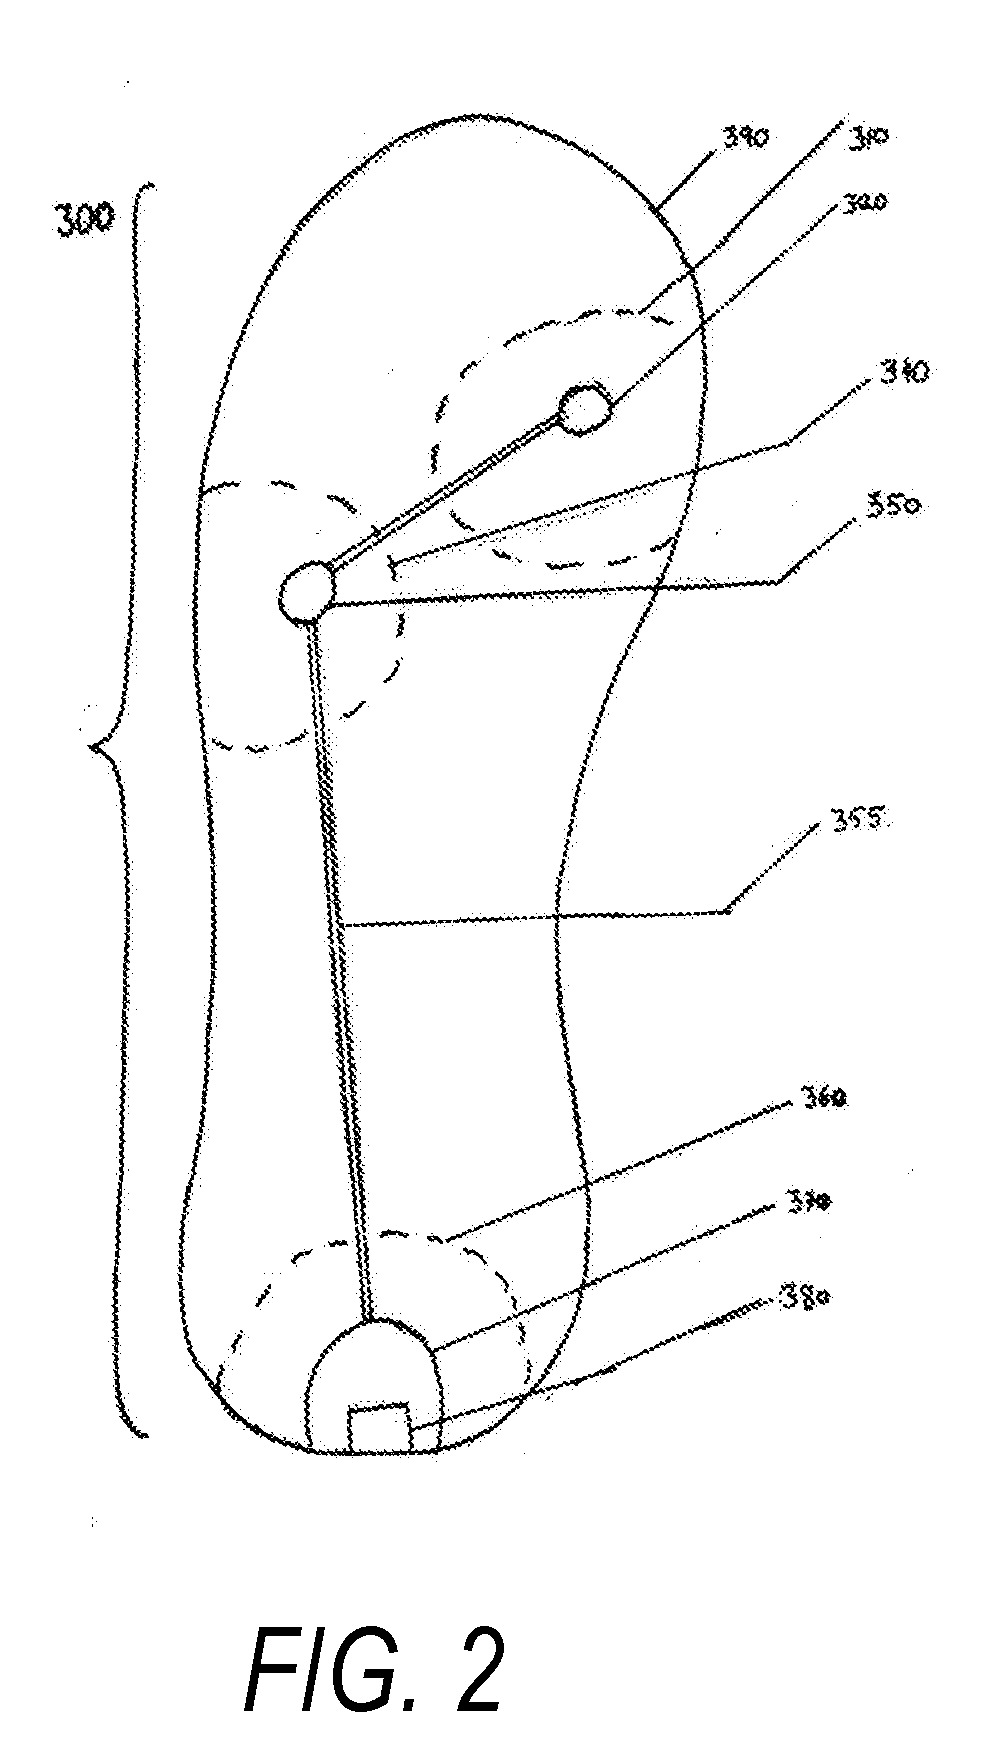 Health and athletic monitoring system, apparatus and method